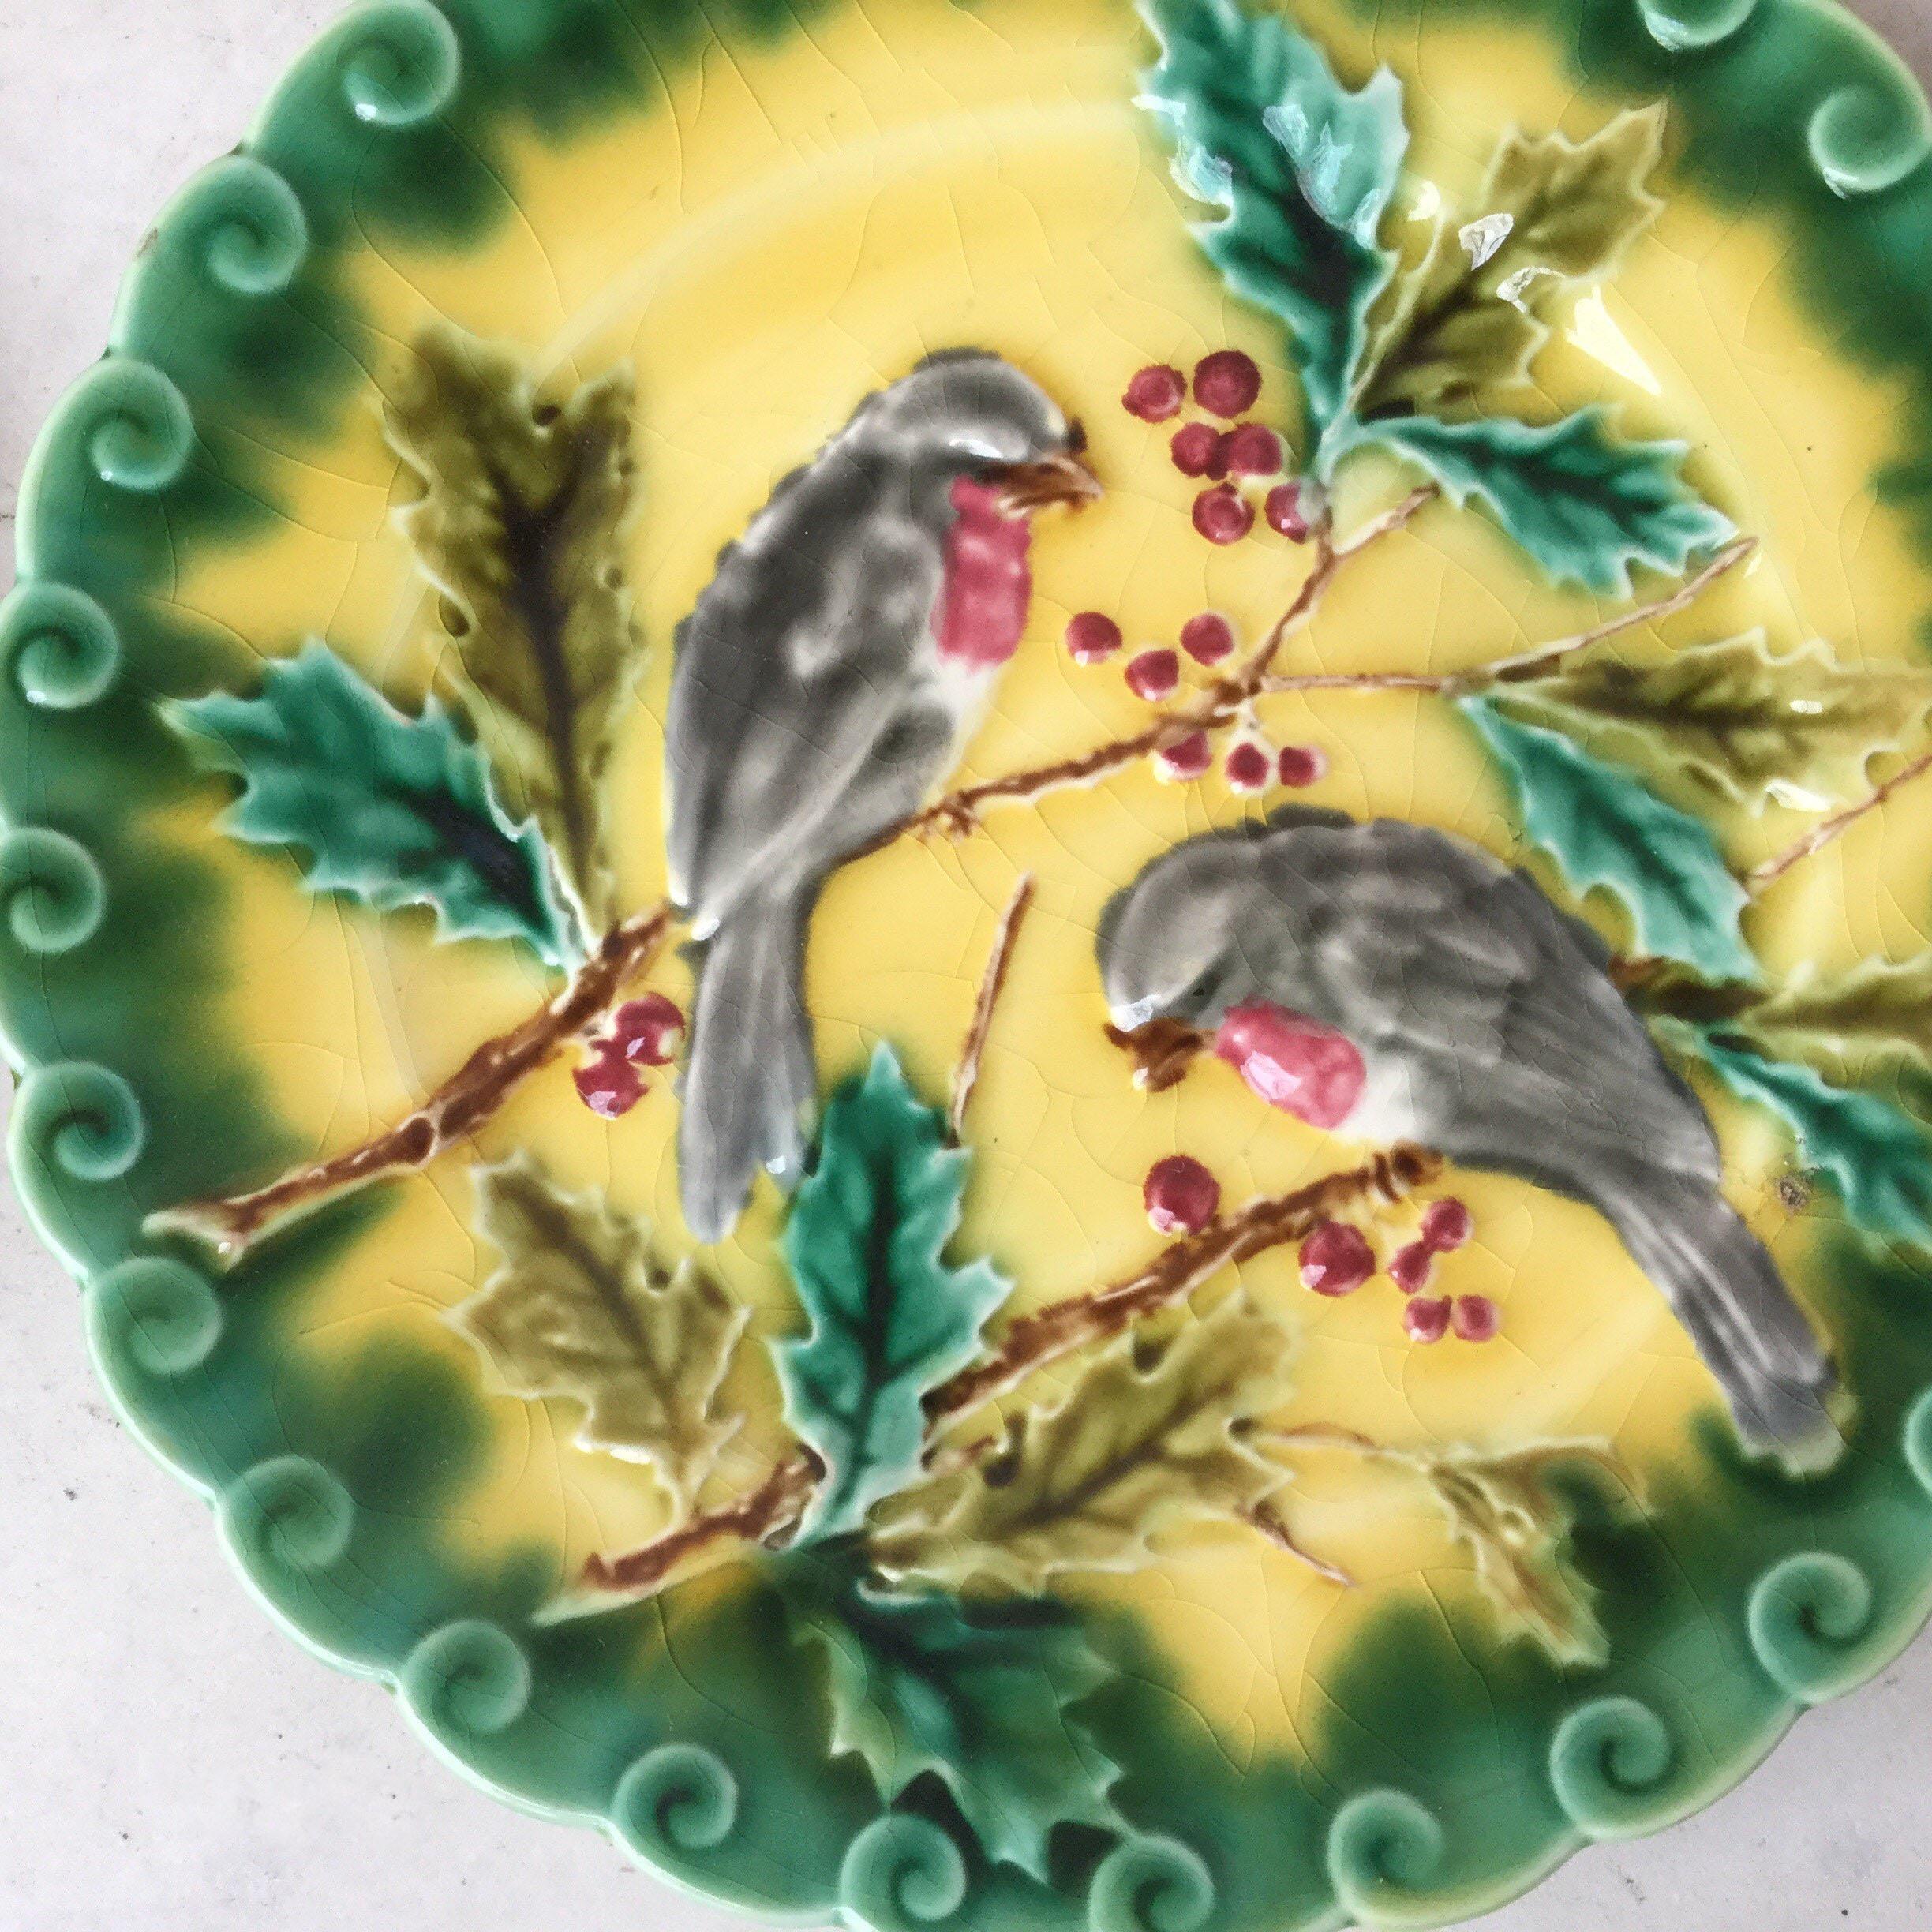 Majolica plate birds with holly signed Sarreguemines, circa 1880.
3 plates are available.